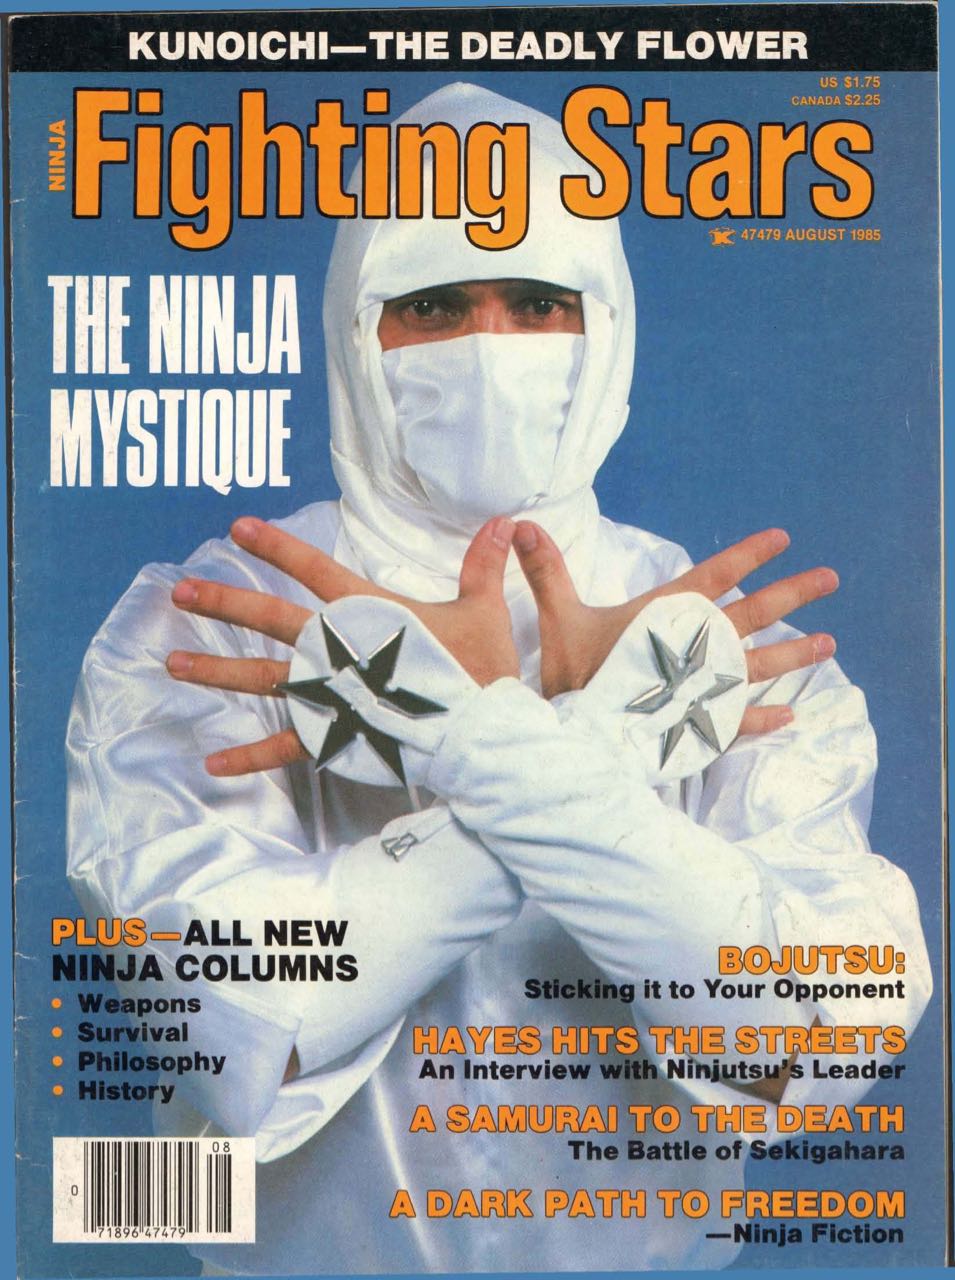 Fighting-Stars-Ninja-August-1985-VOL.-XII-No.-4-Hayes-Hits-the-Streets-The-Ongoing-Journey-of-Stephen-K.-Hayes-by-MikeReplogle.jpg